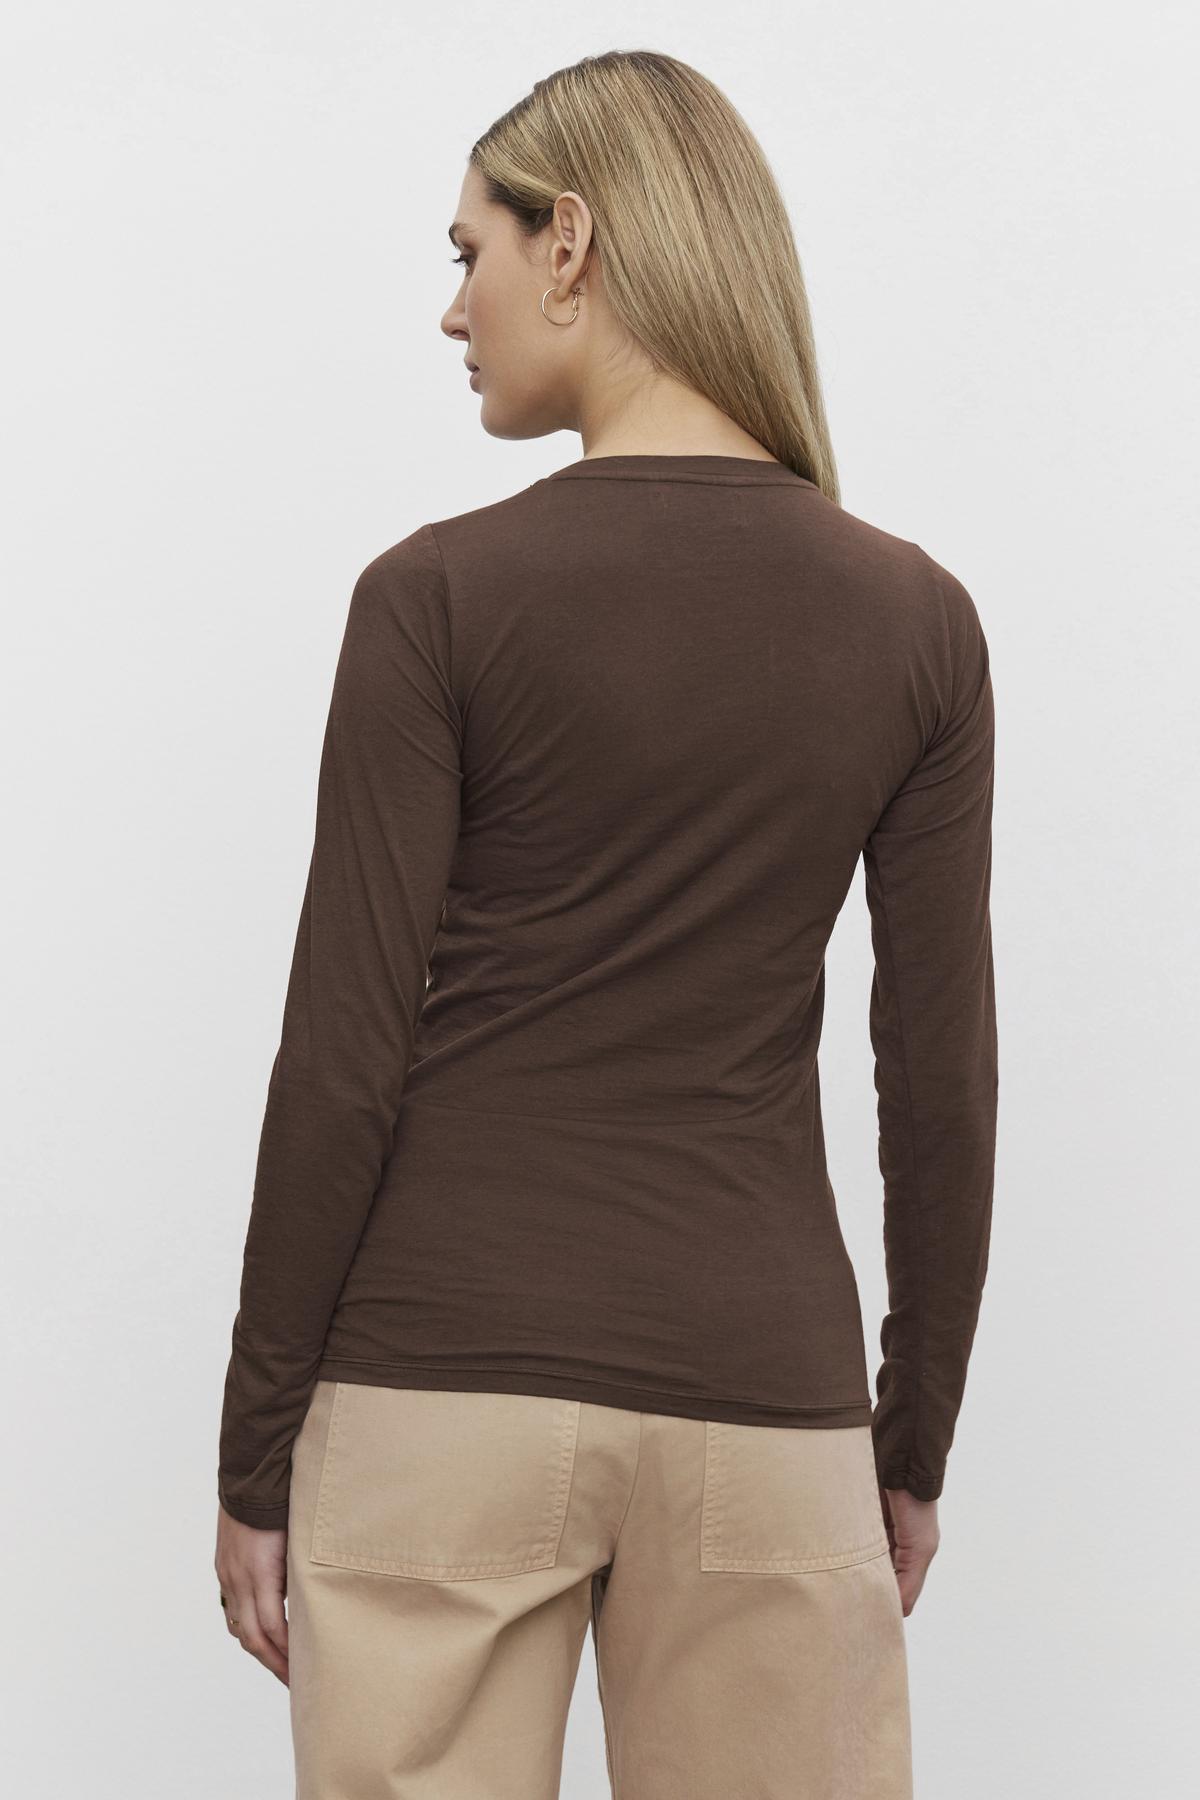 A person with long straight hair is standing and facing away, wearing an ultra-soft ZOFINA TEE by Velvet by Graham & Spencer in whisper brown along with beige pants.-37648688316609